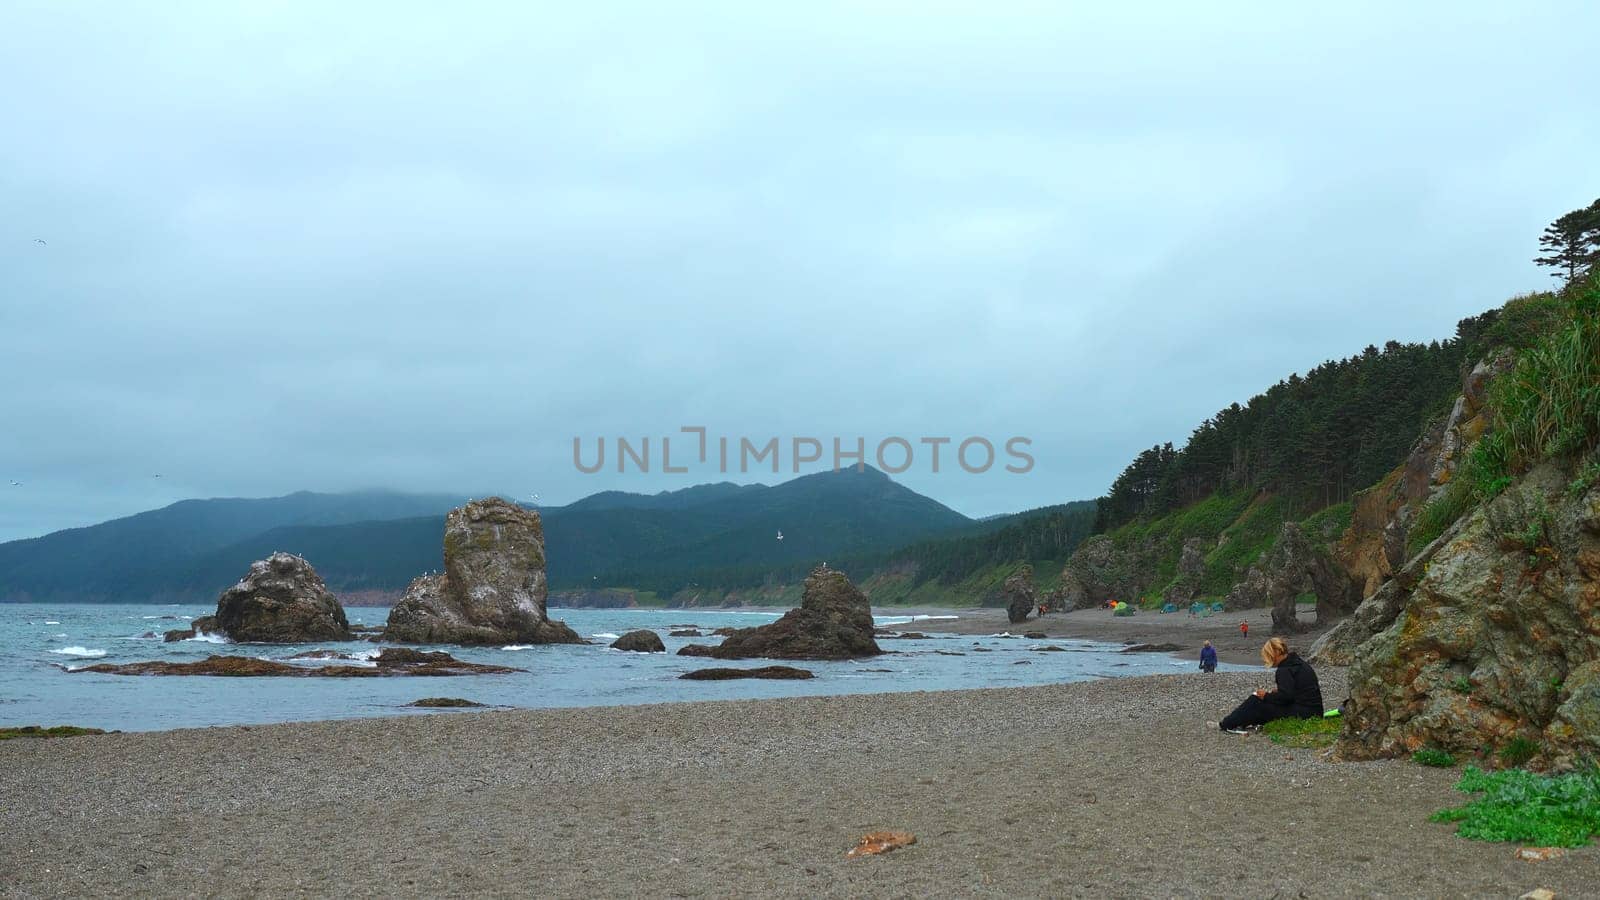 People relax on rocky coast with mountains on cloudy day. Clip. Beautiful coast with rocks and rocks sticking out on shore. People relax on beautiful coast with rocks and mountains.